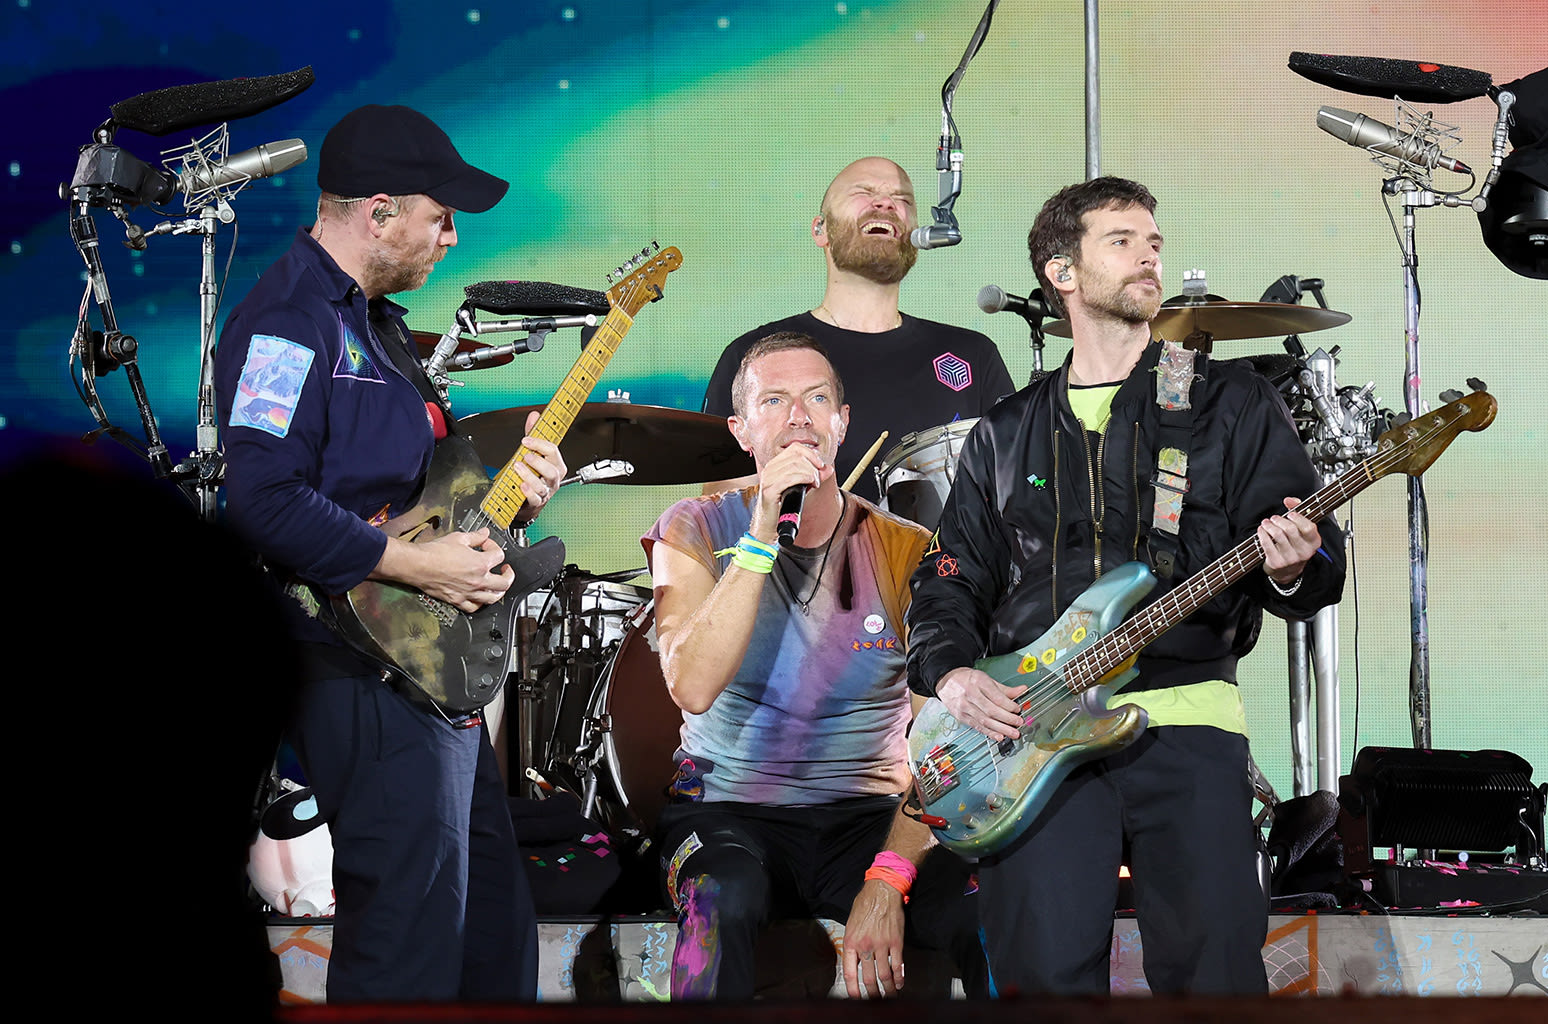 Coldplay Dedicates ‘Everglow’ to Taylor Swift at German Concert: ‘This Is for All of You Who Feel Sad’